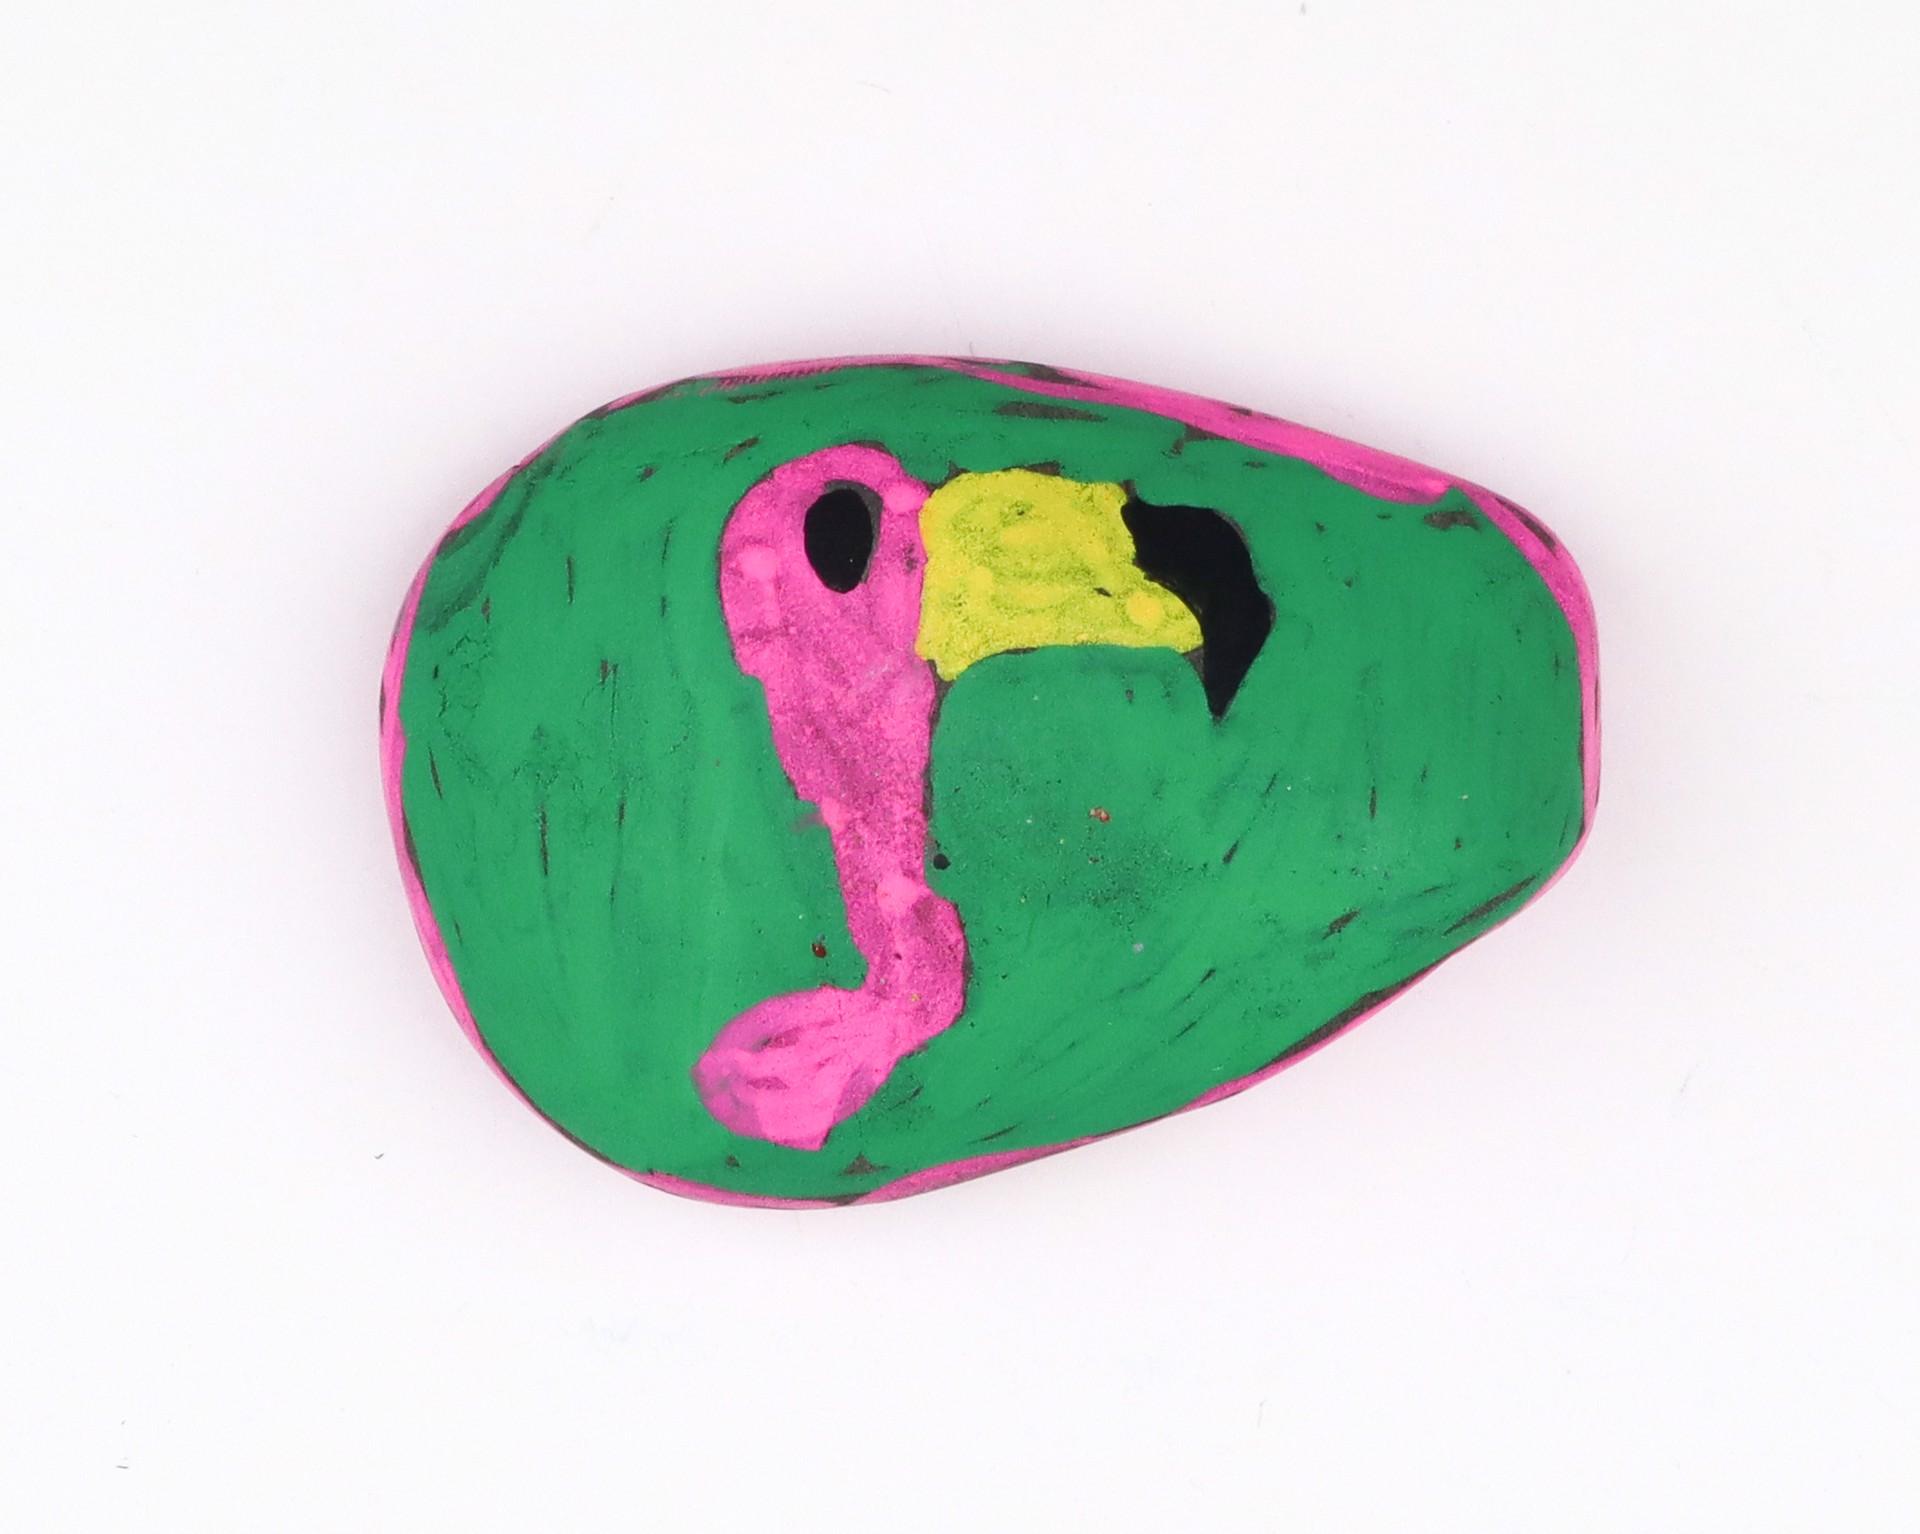 Pet Rock (Flamingo and Blue Bird) by Maurice Barnes